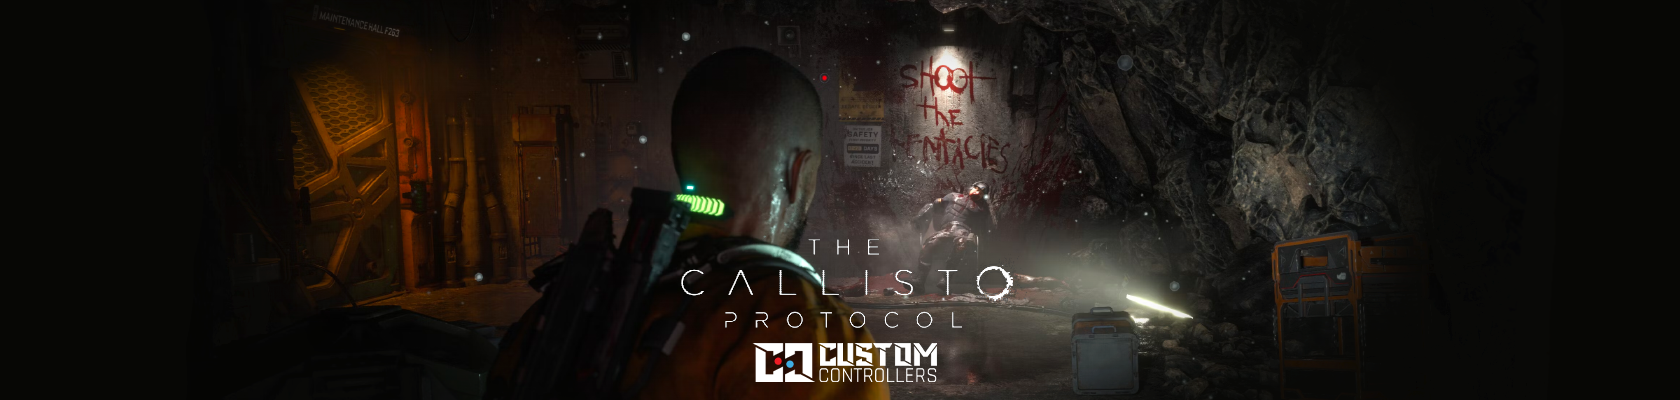 The Callisto Protocol Review · Who knew violence could be so tedious?